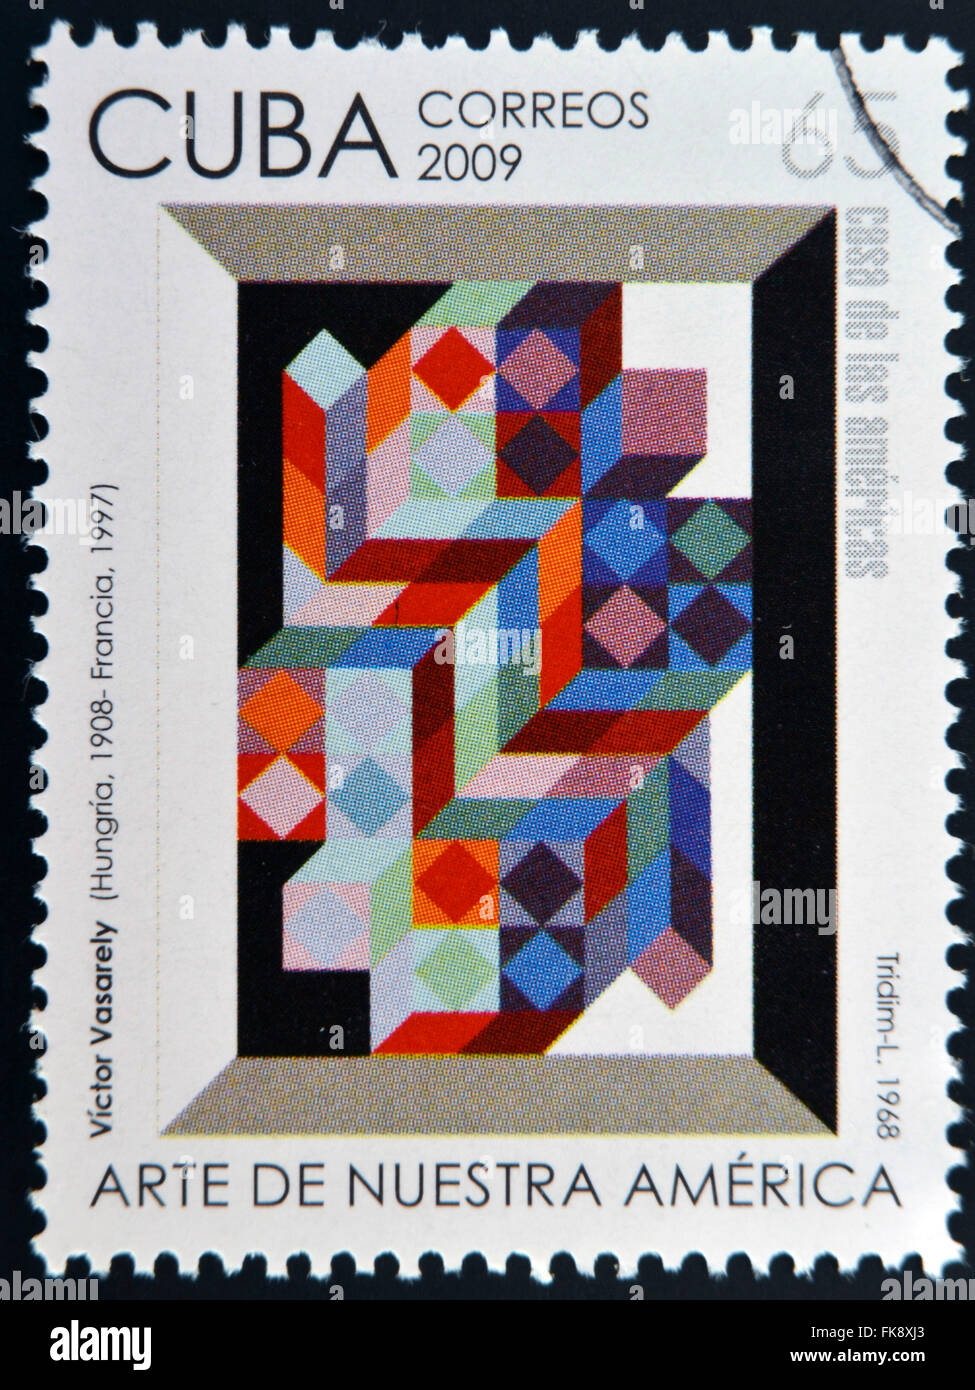 CUBA - CIRCA 2009: A stamp printed in Cuba dedicated to the art of our America, shows Tridim L by Victor Vasarely, circa 2009 Stock Photo